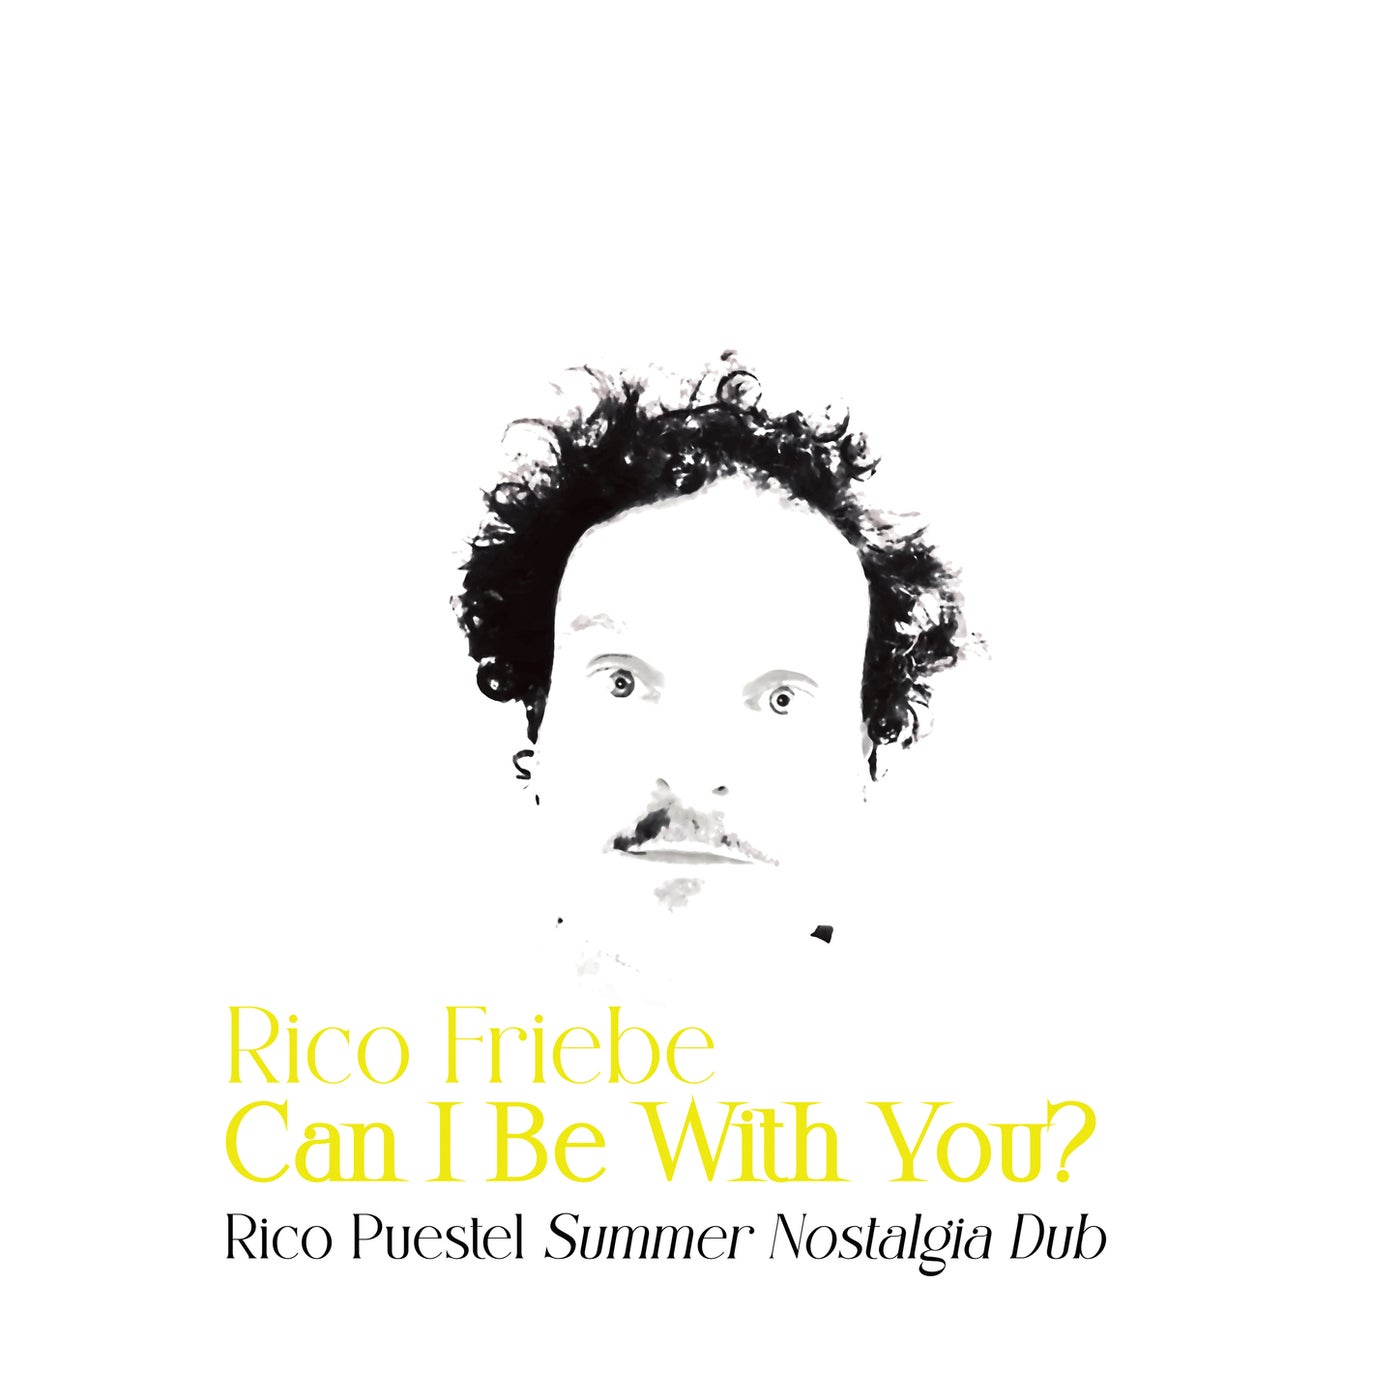 Can I Be With You? (Rico Puestel Summer Nostalgia Dub)